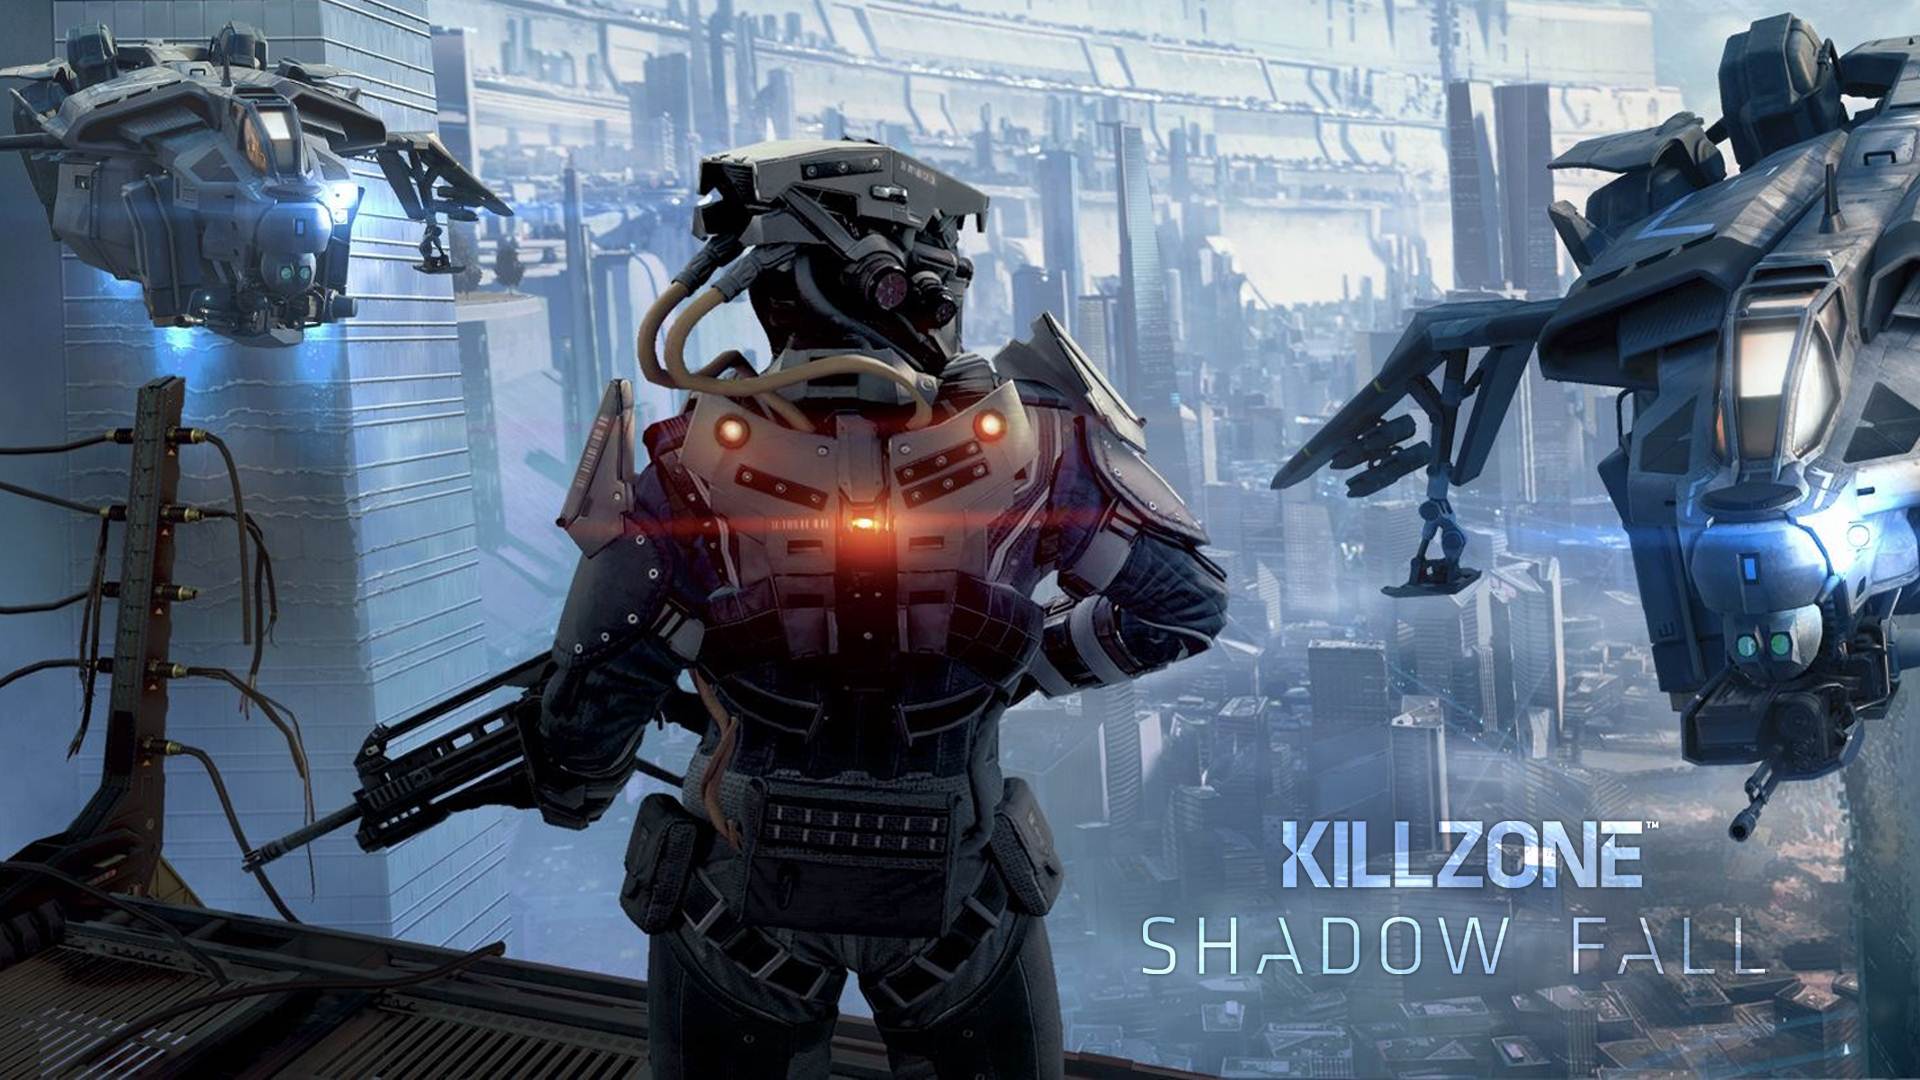 First Person, FPS, gaming, Guerrilla Games, Killzone, playstation, Playstation 4, ps4, review, Shadow Fall, sony, trailer